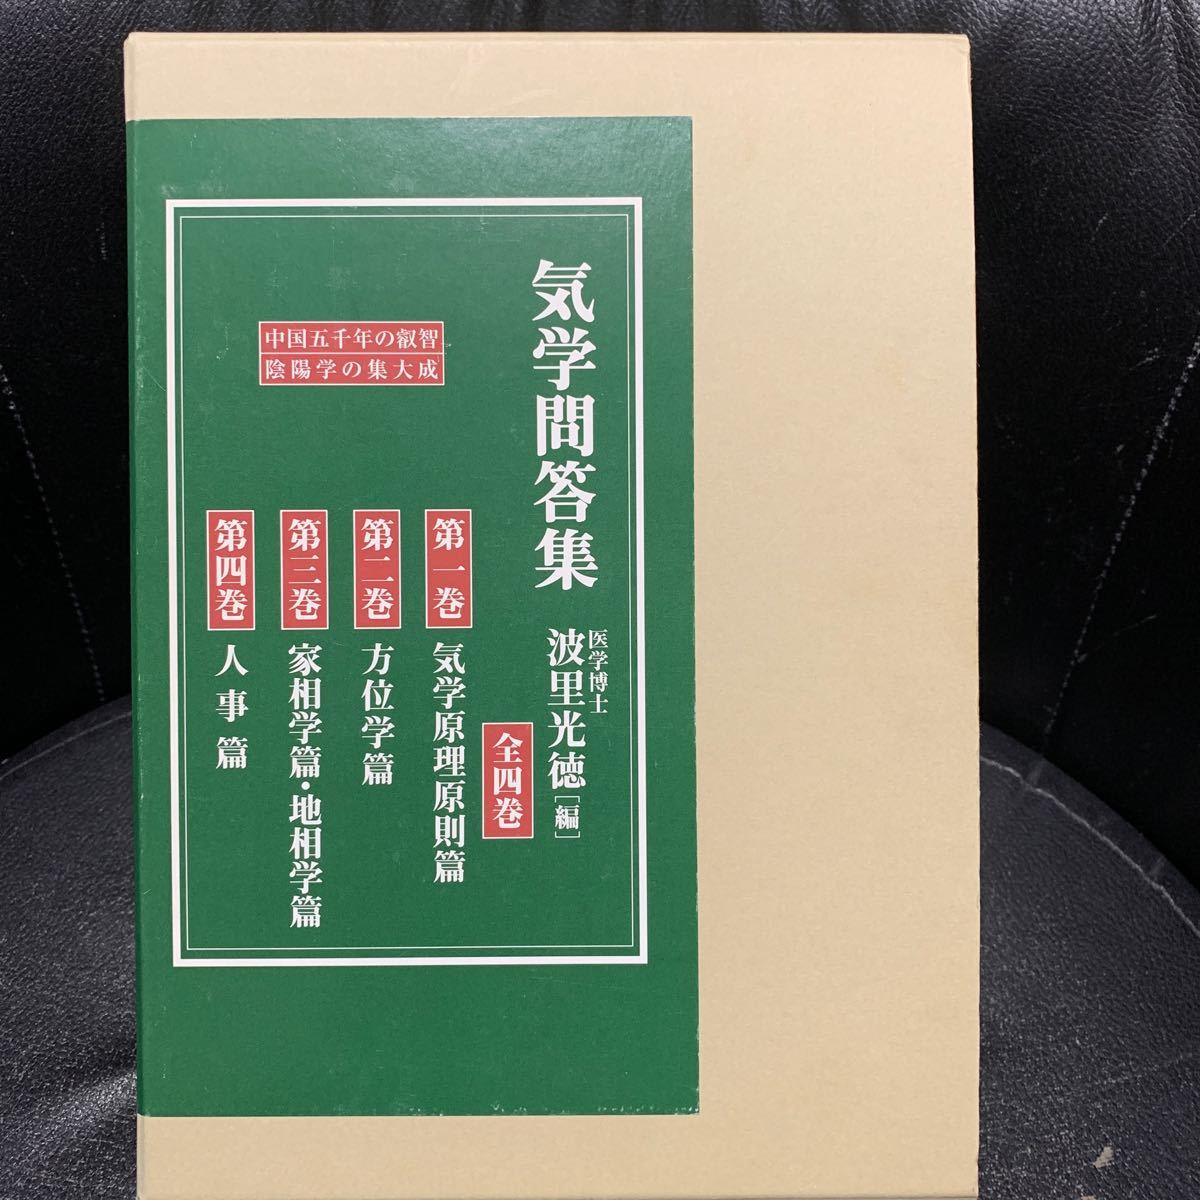  higashi foreign book ..... compilation all four volume wave . light virtue the first volume .... principle ./ second volume direction ../ third volume house ...* ground .../ no. four volume person .. origin box attaching 